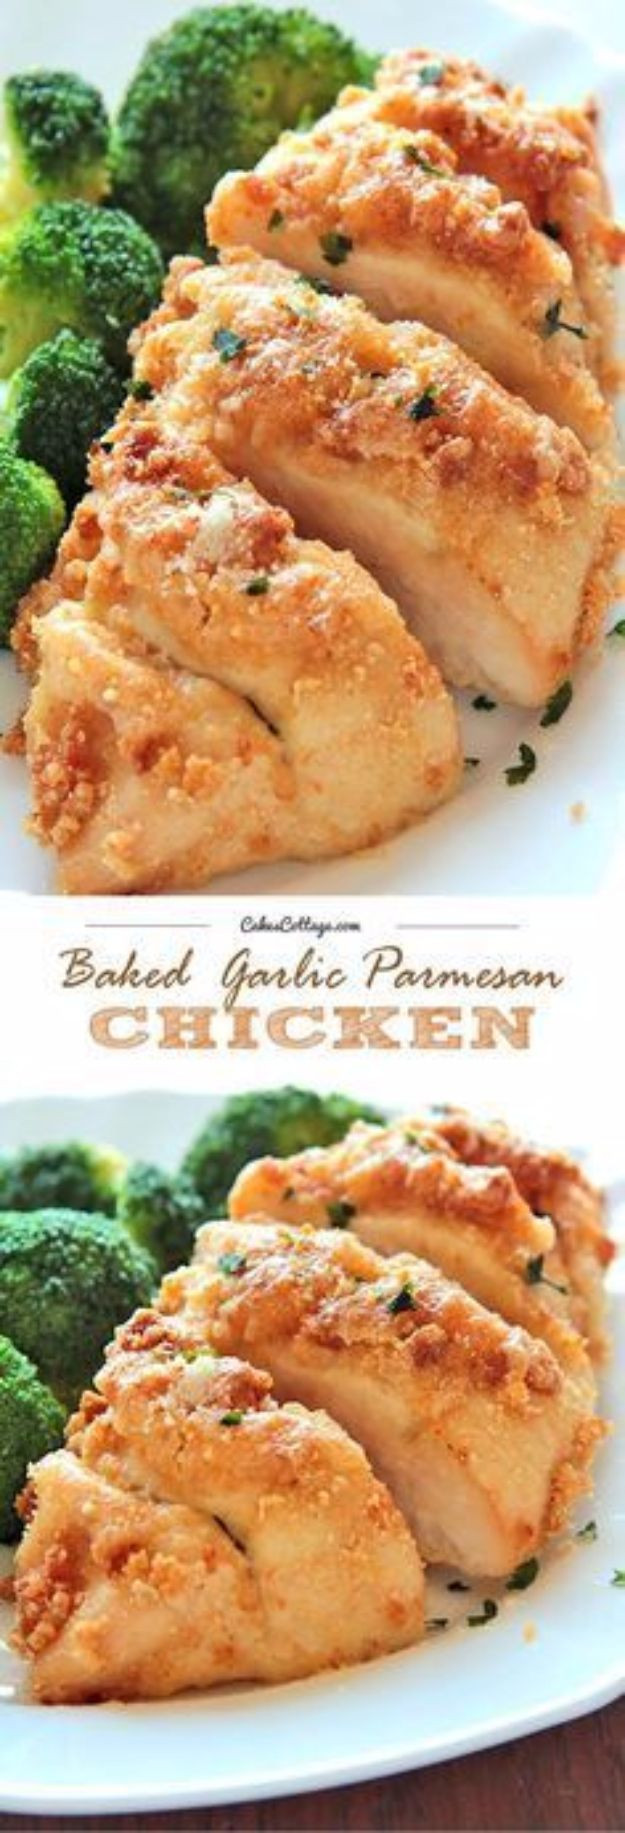 Healthy Baked Chicken Recipes Easy
 The 25 best Healthy dinner recipes ideas on Pinterest